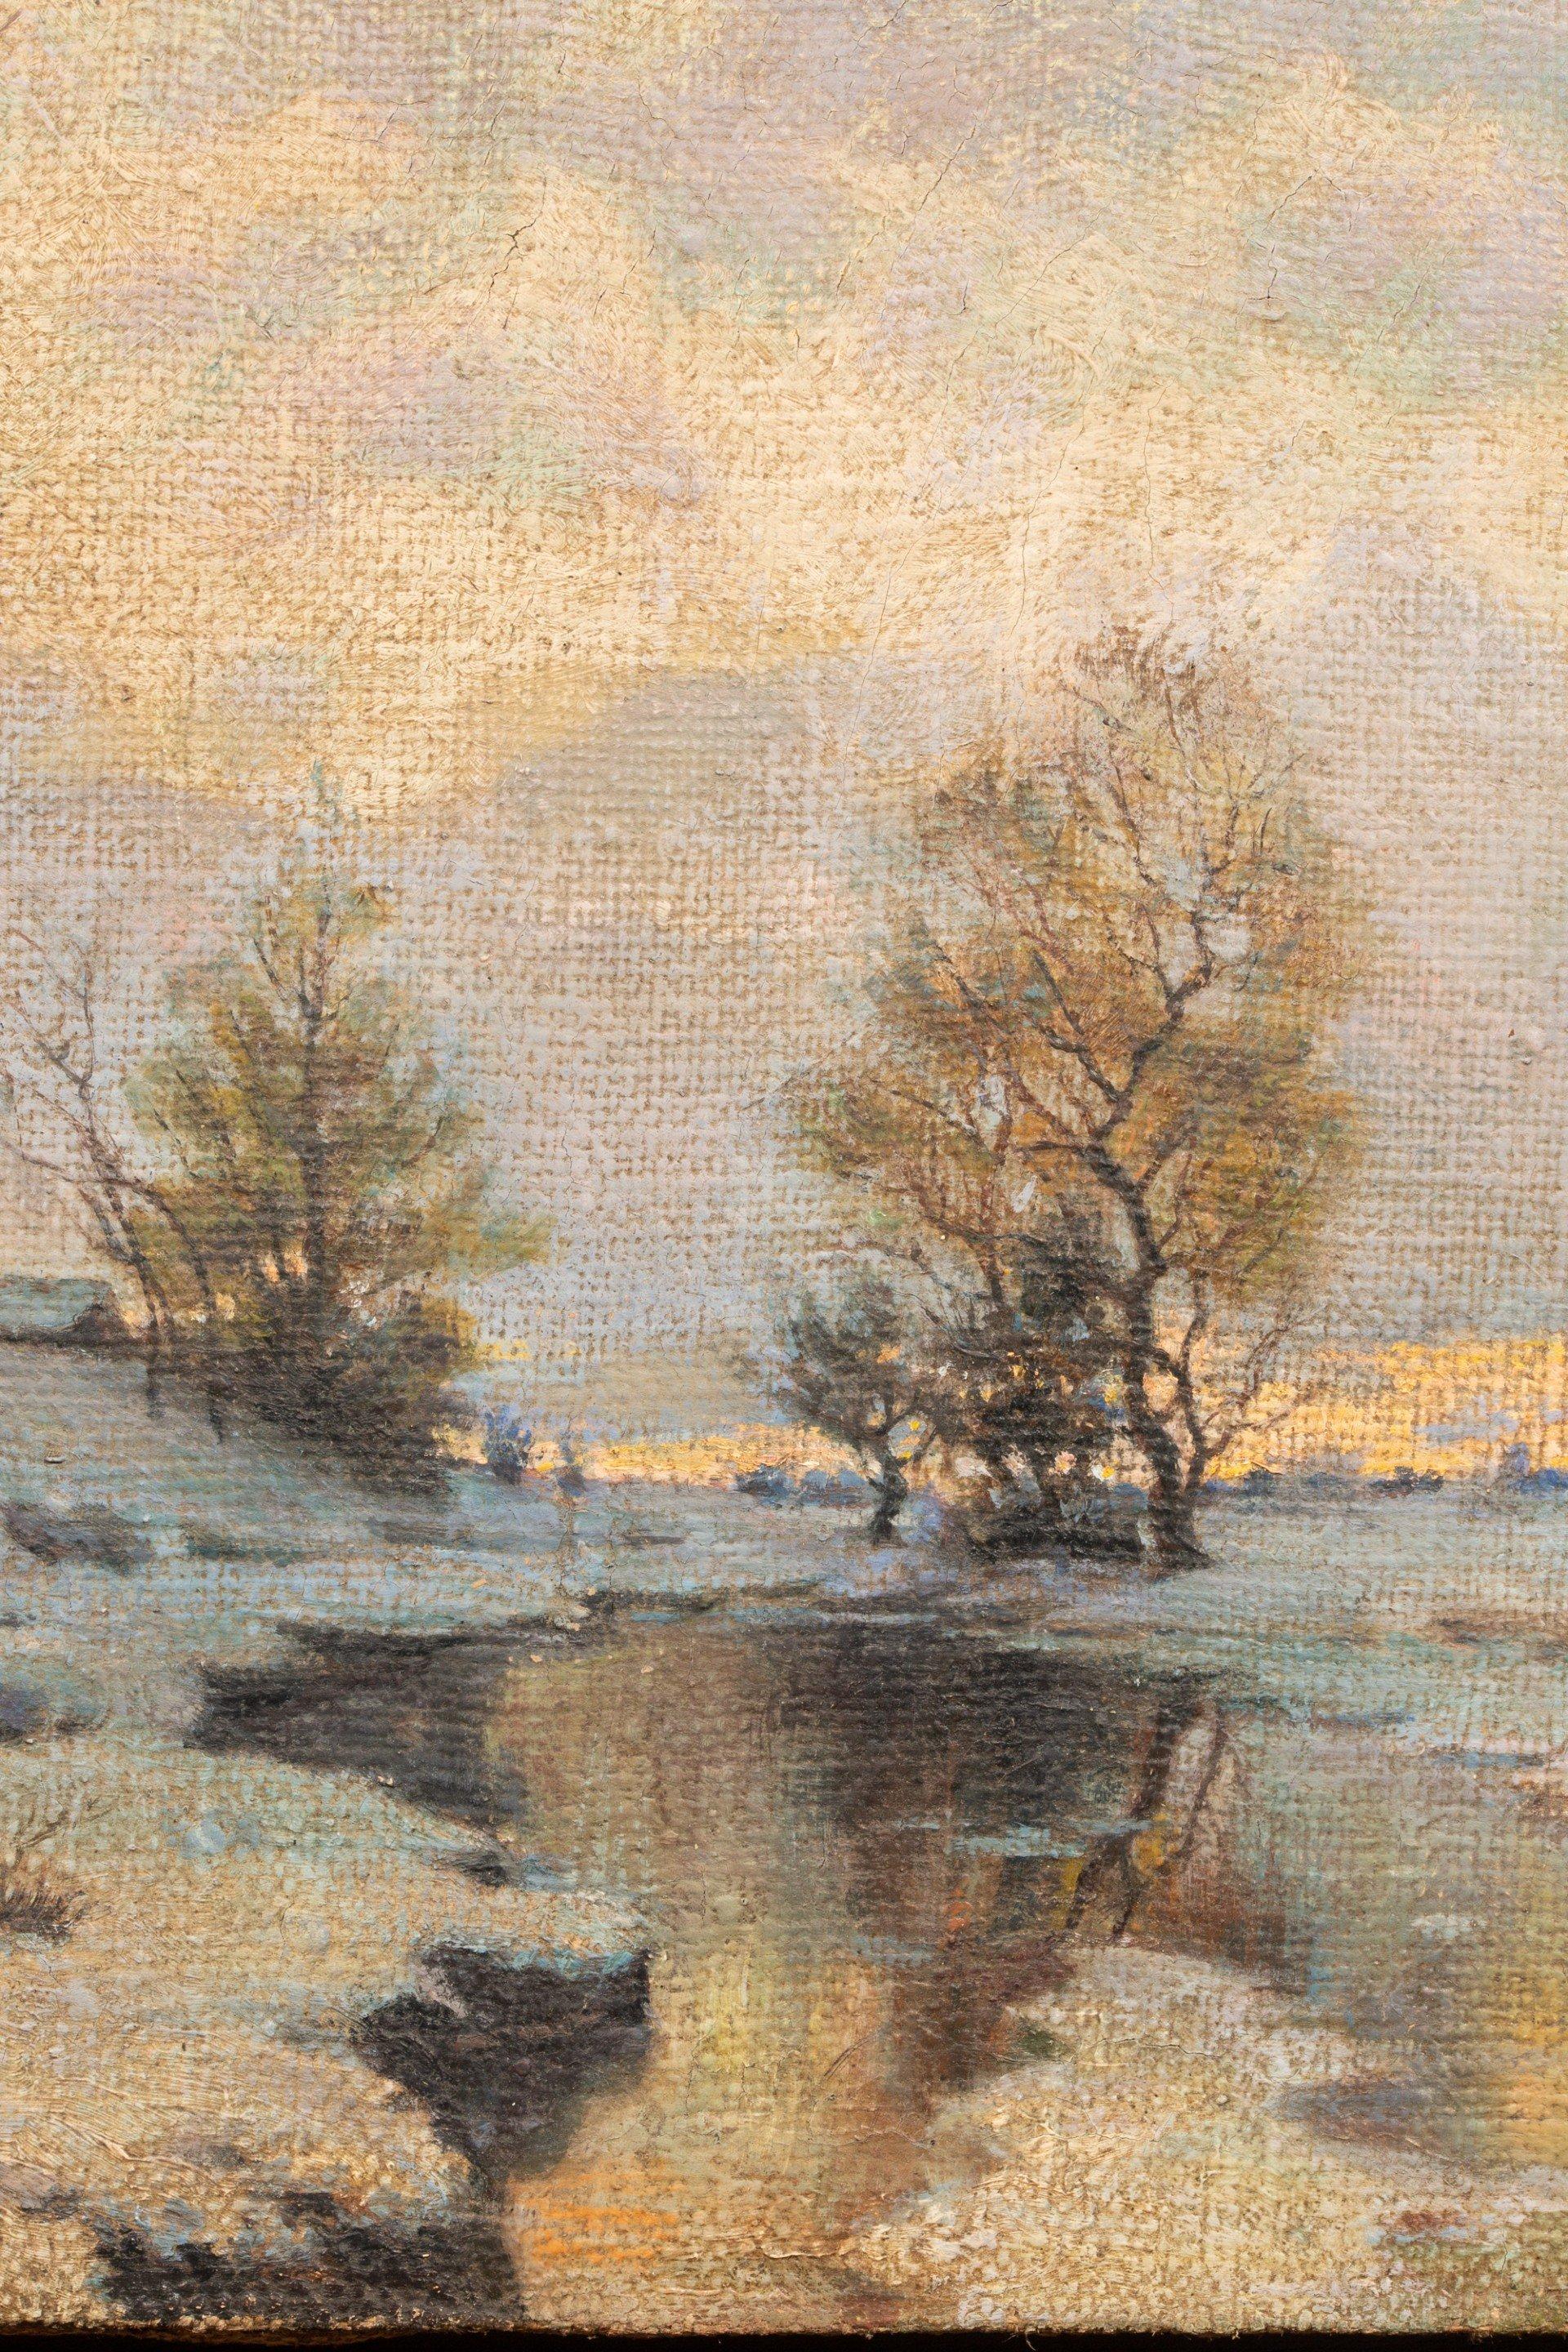 Early spring (Sketch), oil on jute by Endogurov Ivan Ivanovich (1861-1898) For Sale 3